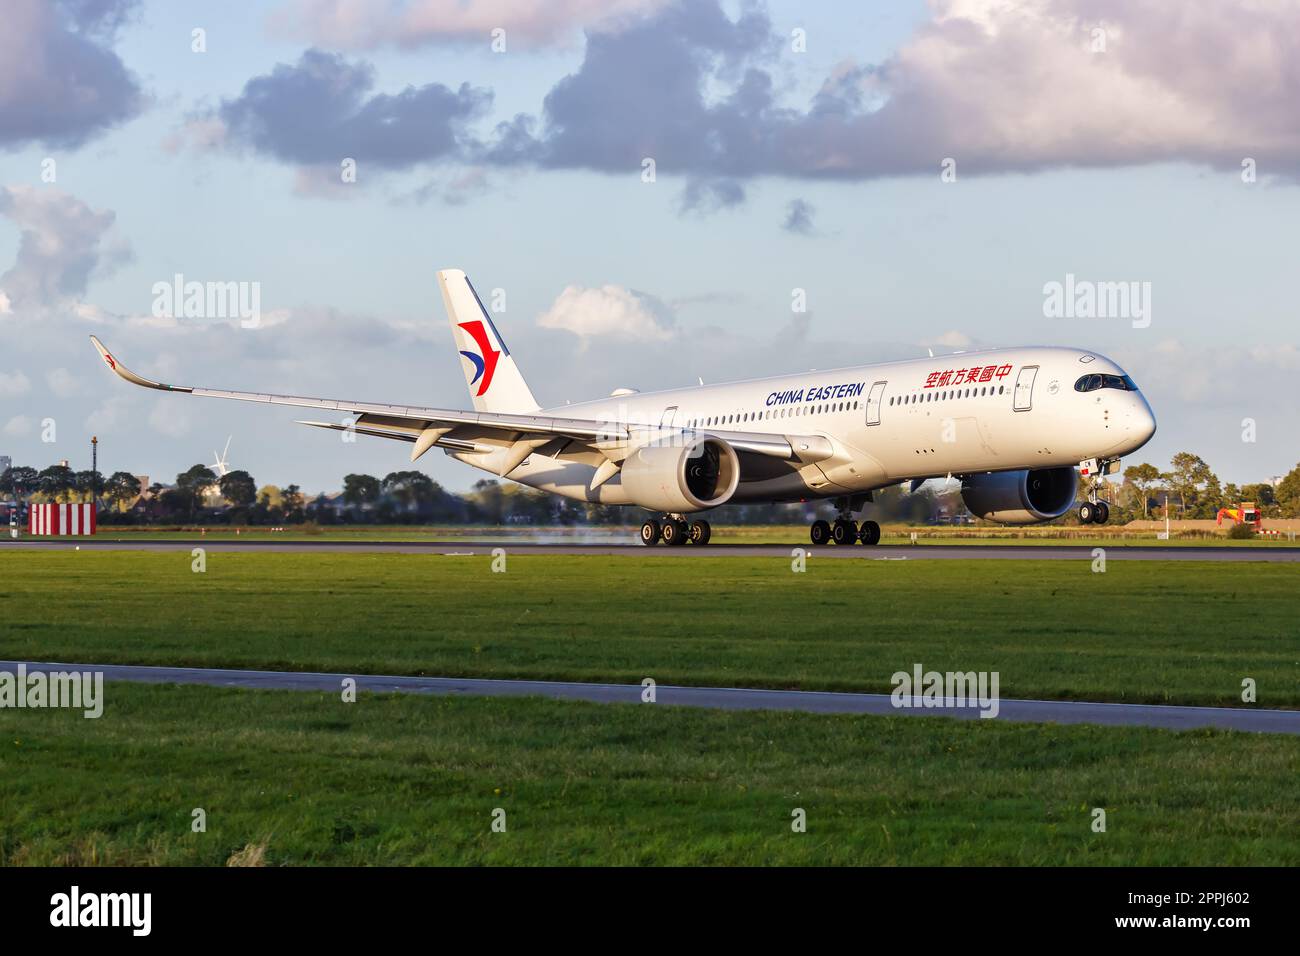 China Eastern Airbus A350-900 airplane at Amsterdam Schiphol airport in the Netherlands Stock Photo